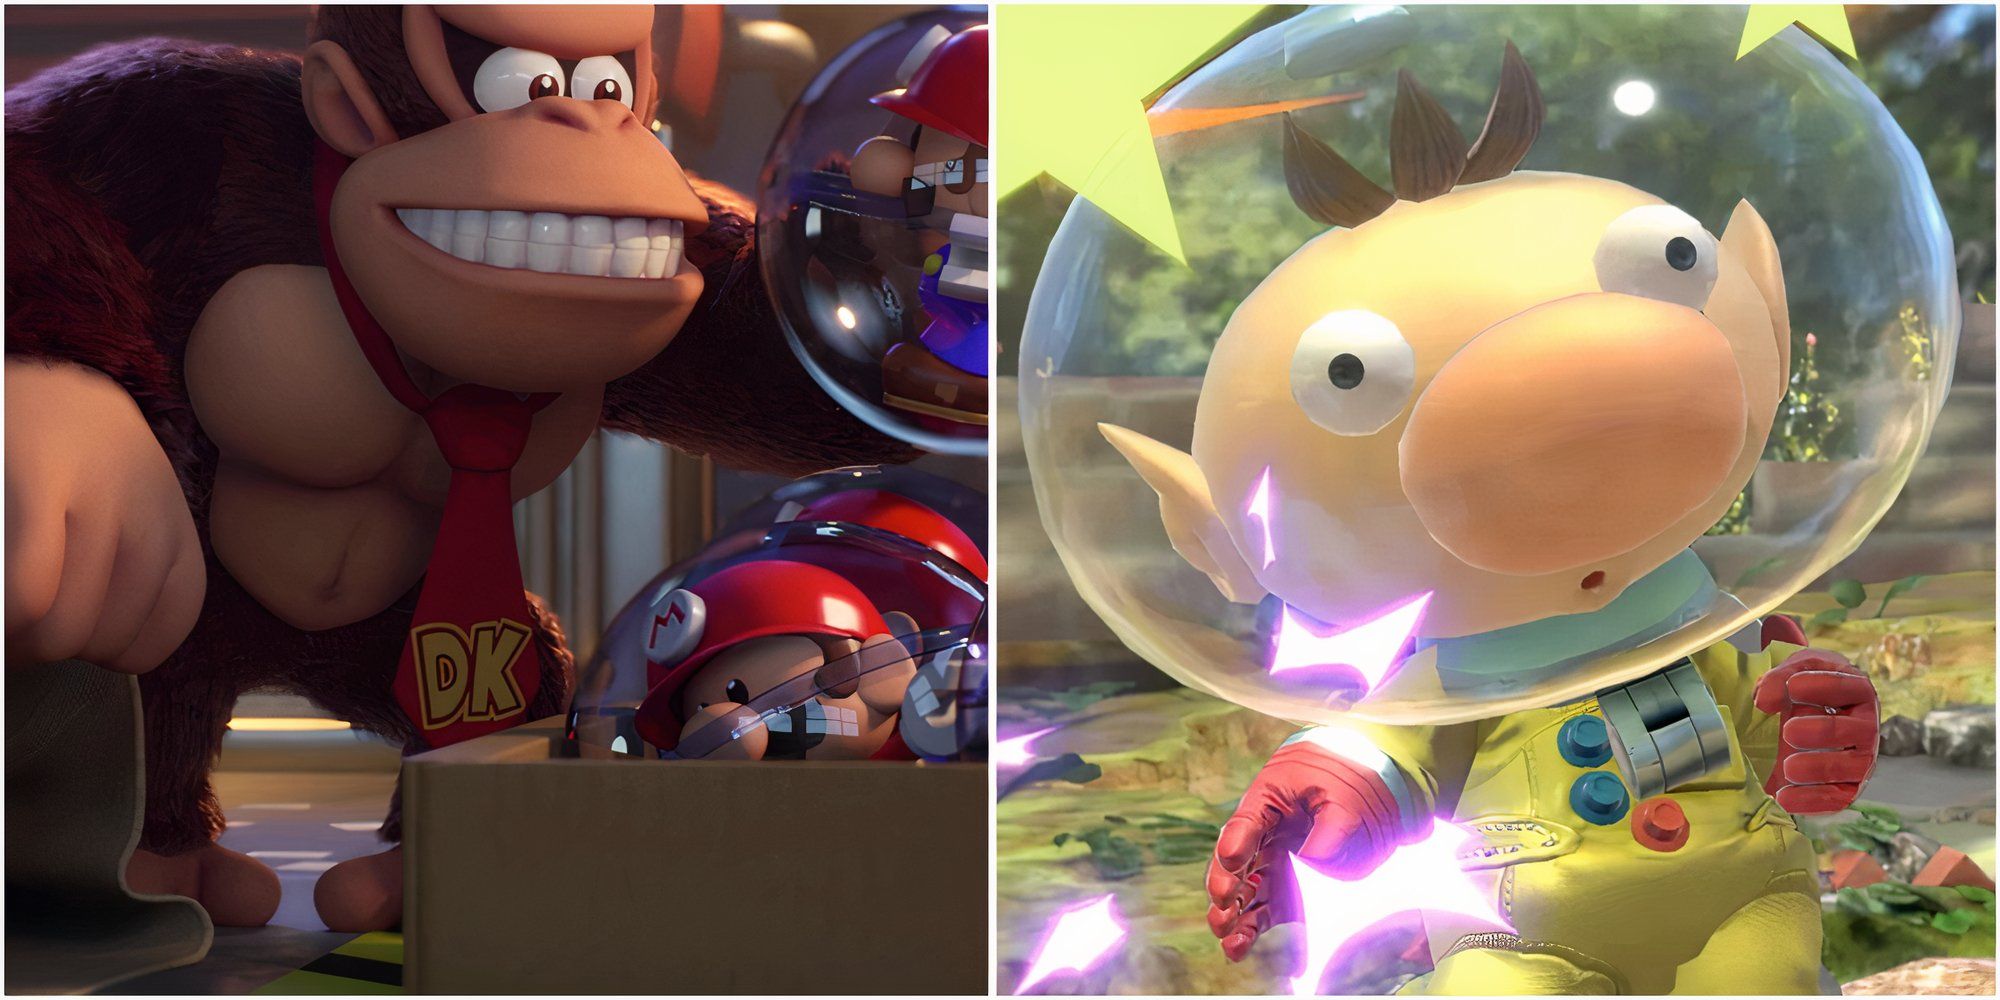 Donkey Kong stealing toys in Mario vs. Donkey Kong and Captain Olimar in Pikmin